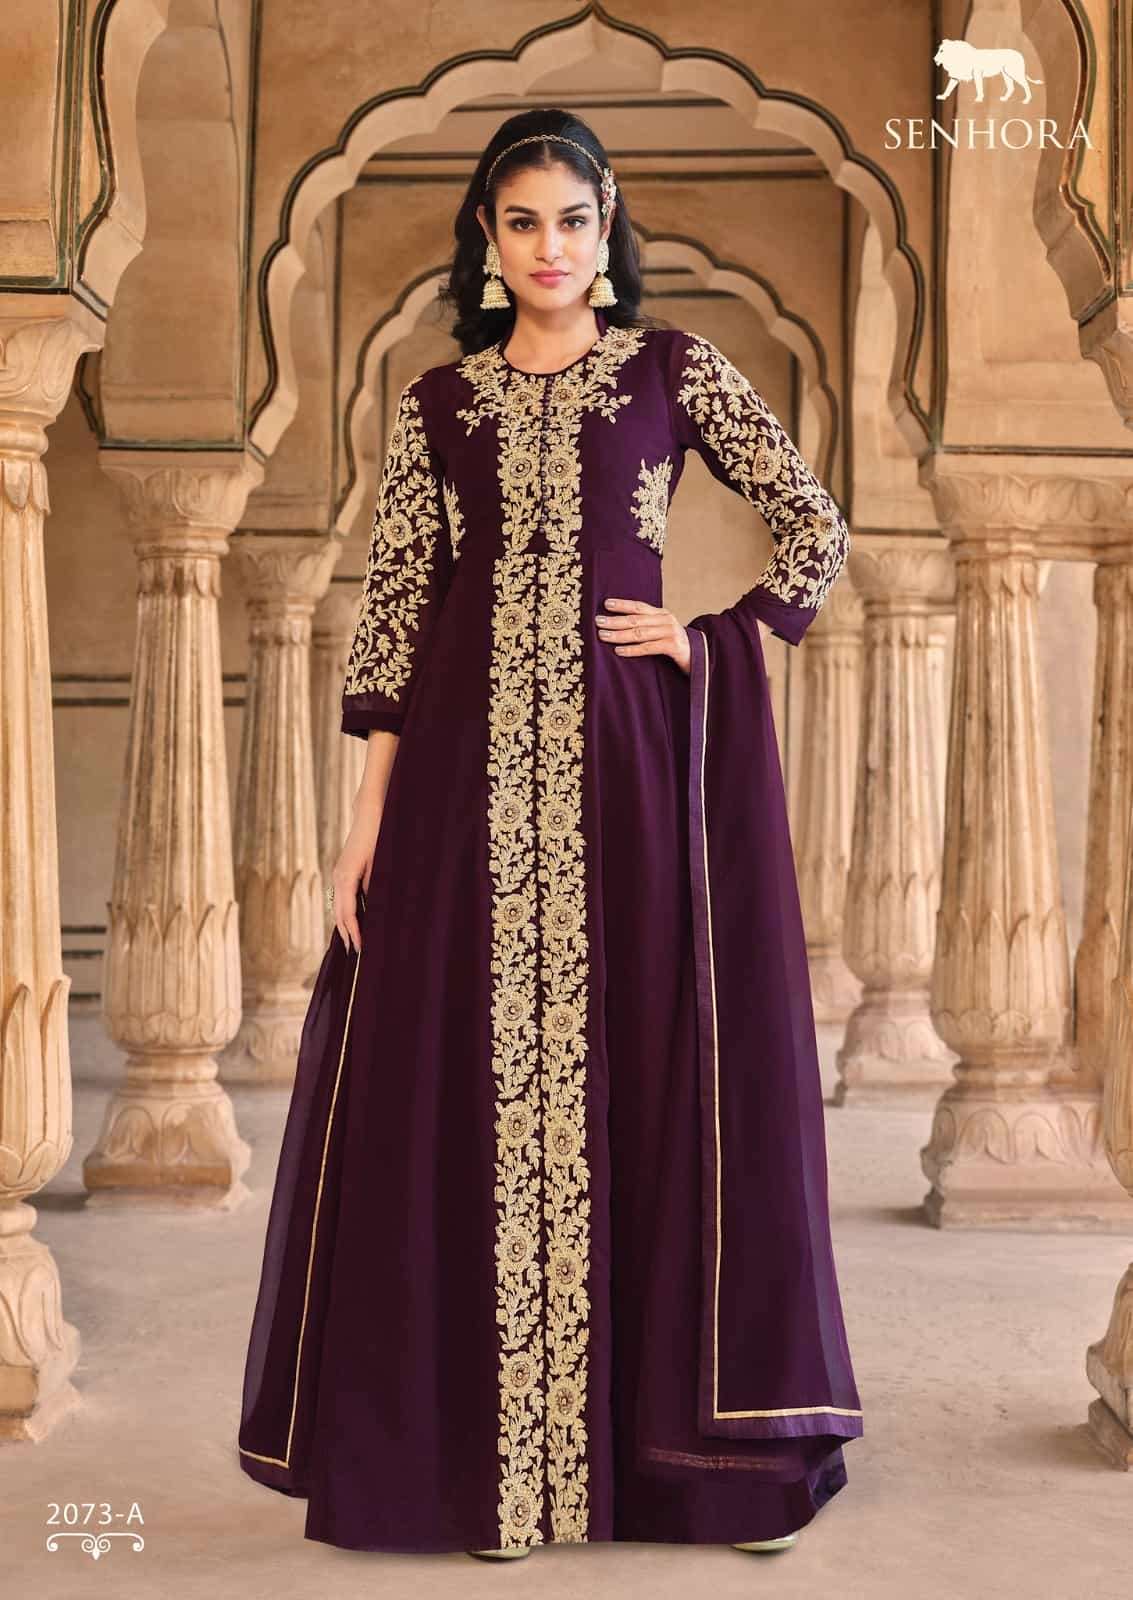 Senhora 2073 A Aadhya Party Wear Style Heavy Designer Suit Collection